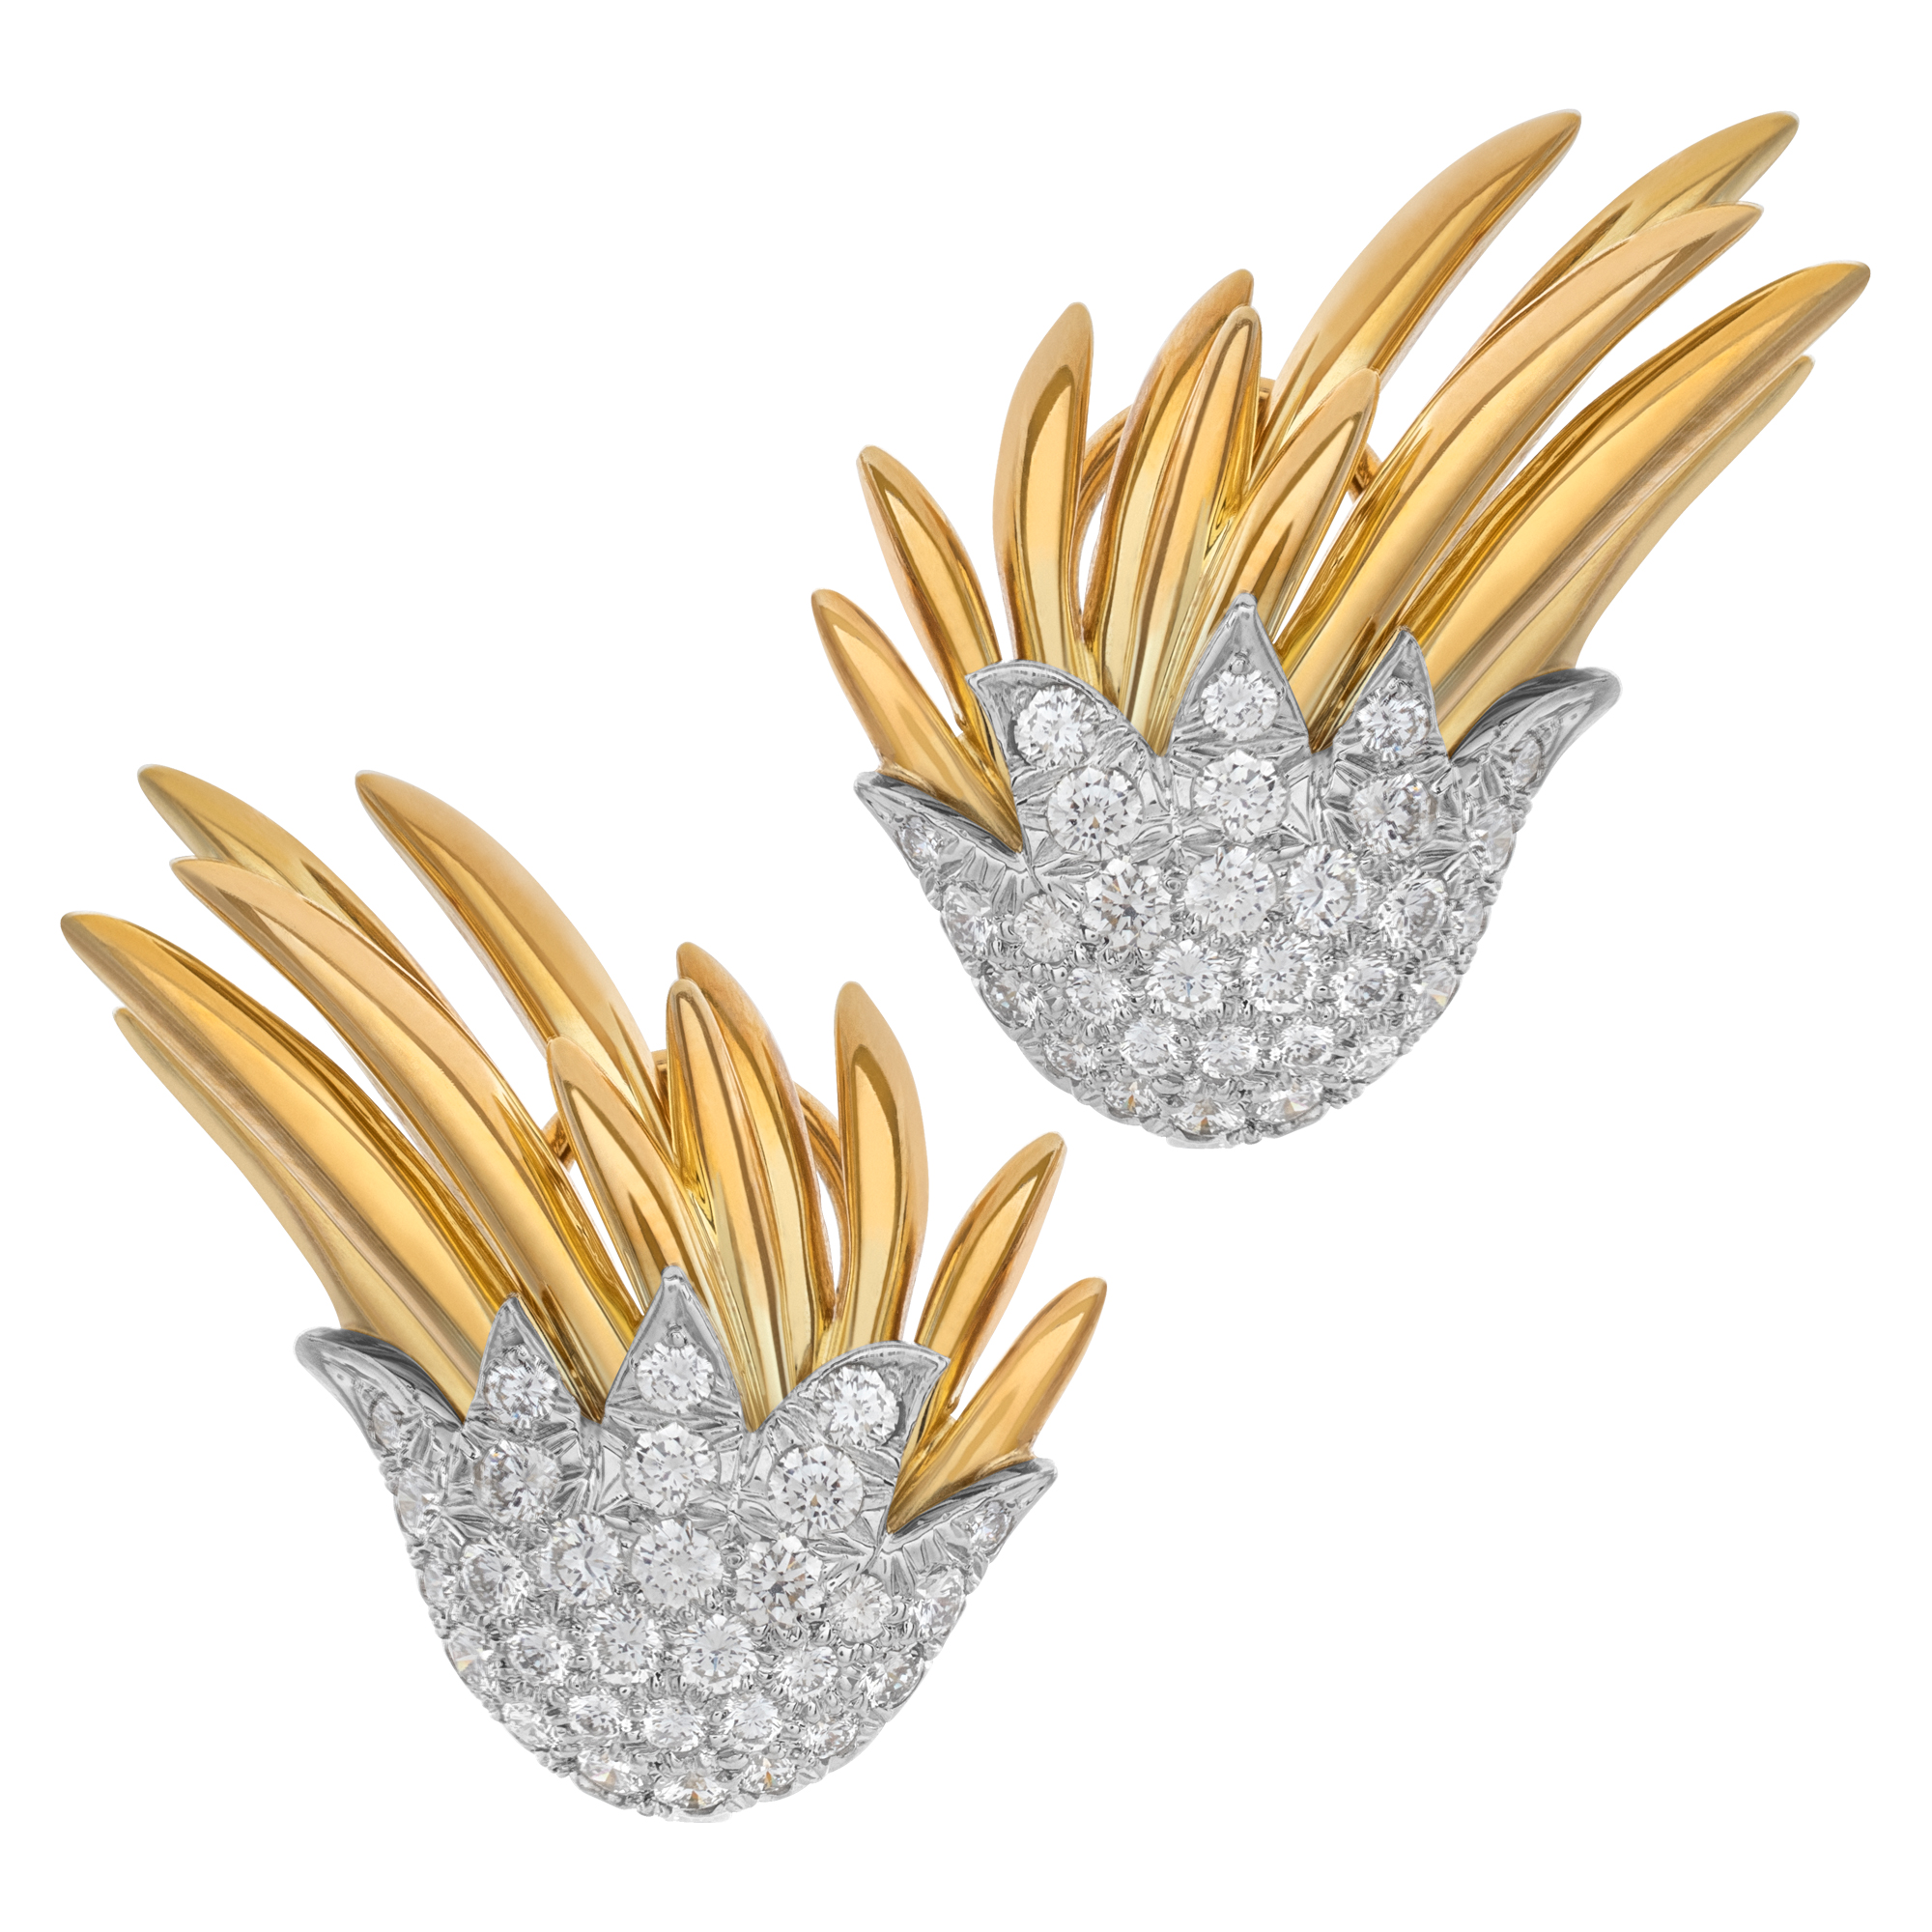 Tiffany & Co. Schlumberger "Flame" diamond earrings in platinum and 18k yellow gold